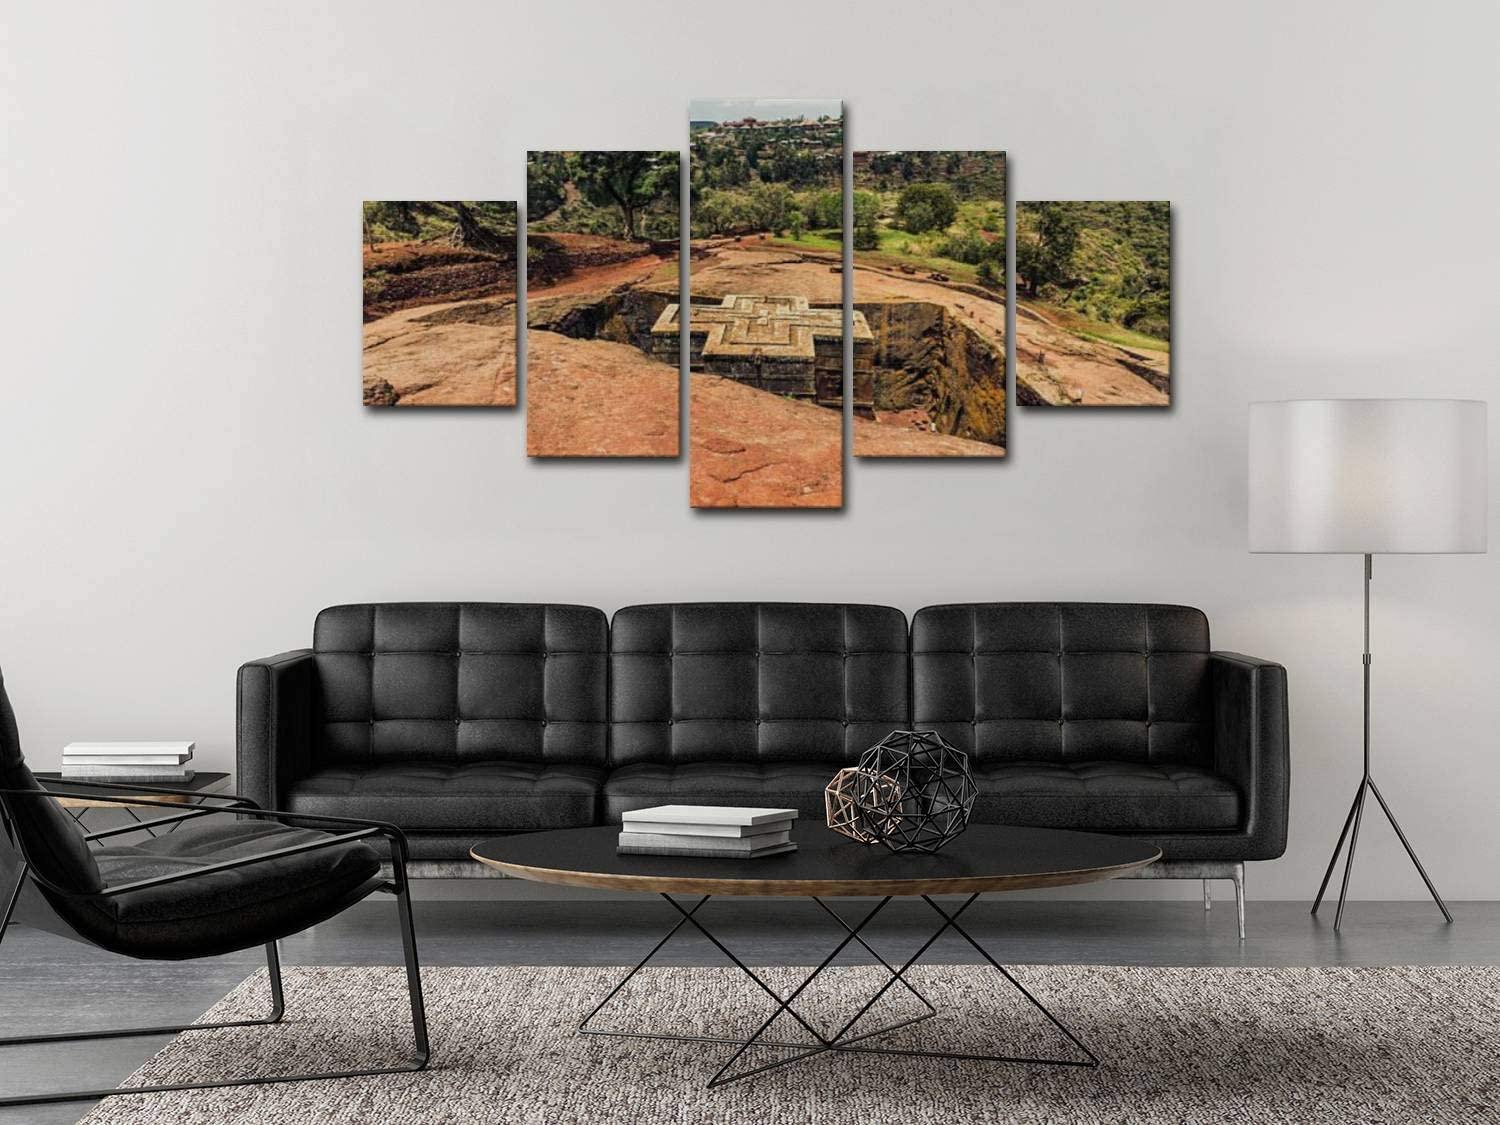 Canvas Art Wall St George Church in Lalibela Ethiopia Paintings Vintage Prints Home Decor Artworks Gift Ready to Hang for Living Room 5 Panels Large Size